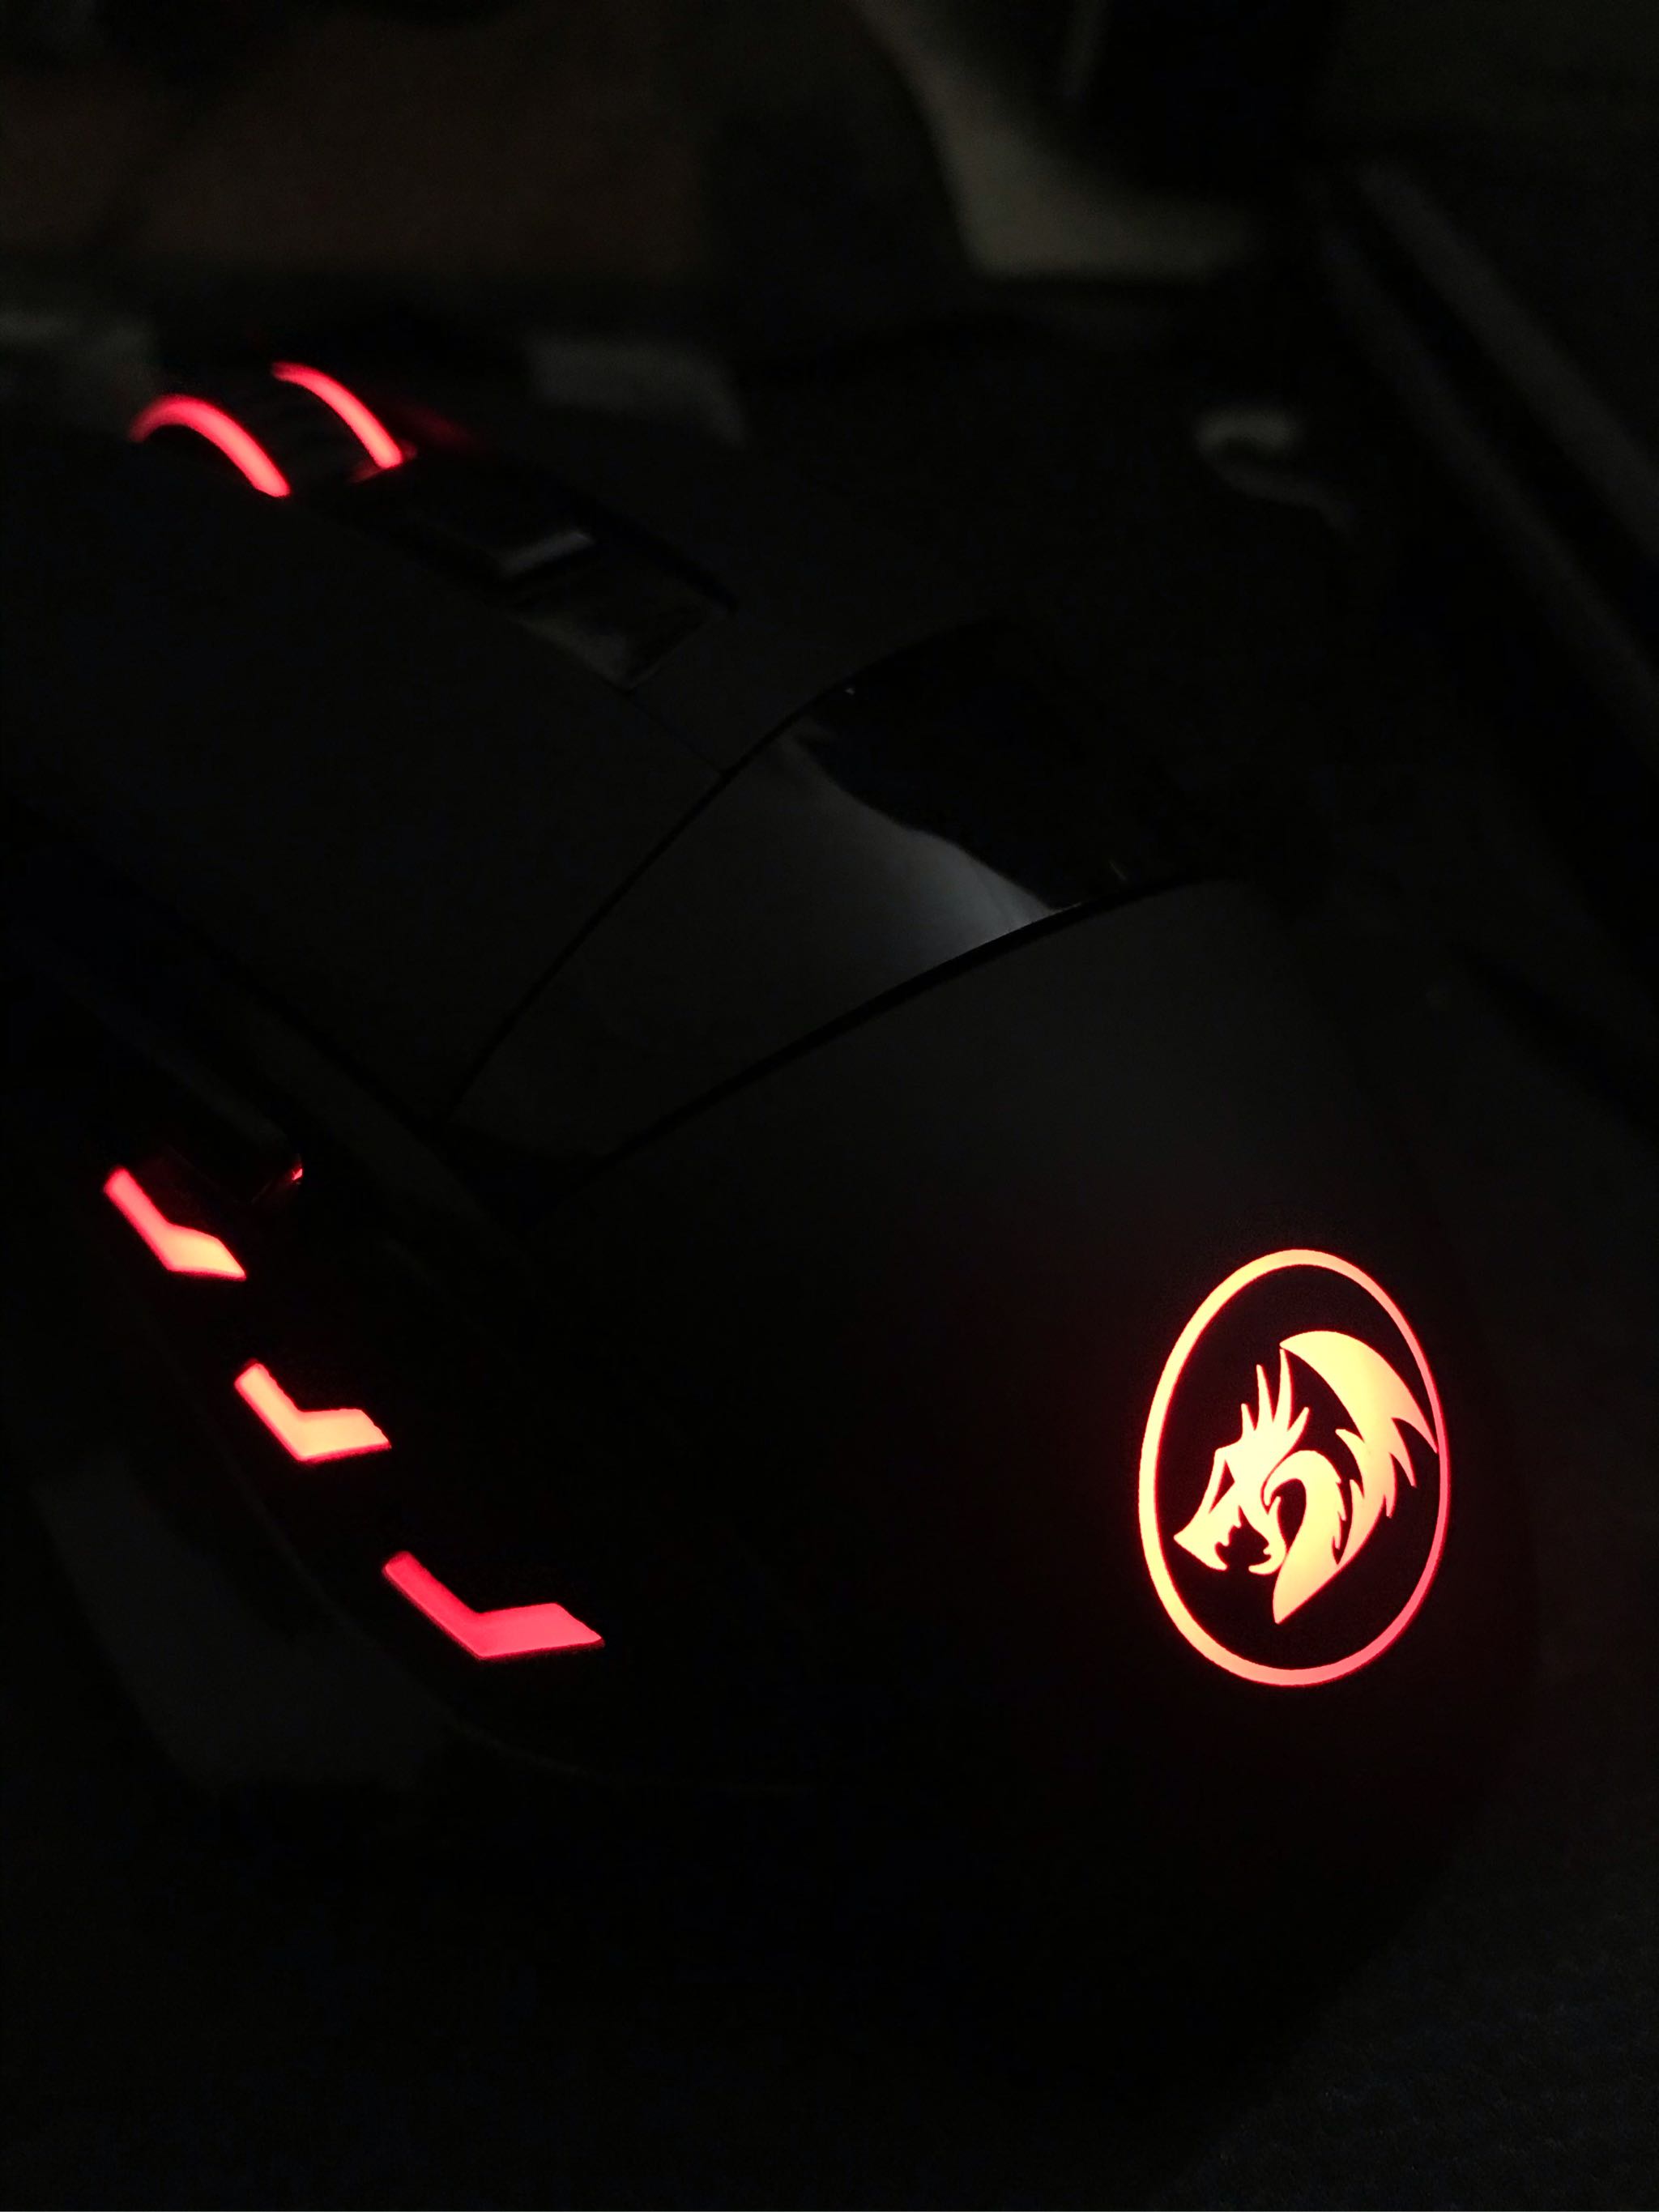  Redragon M609 Phaser 3200 DPI Gaming Mouse LED Backlight 6 Buttons